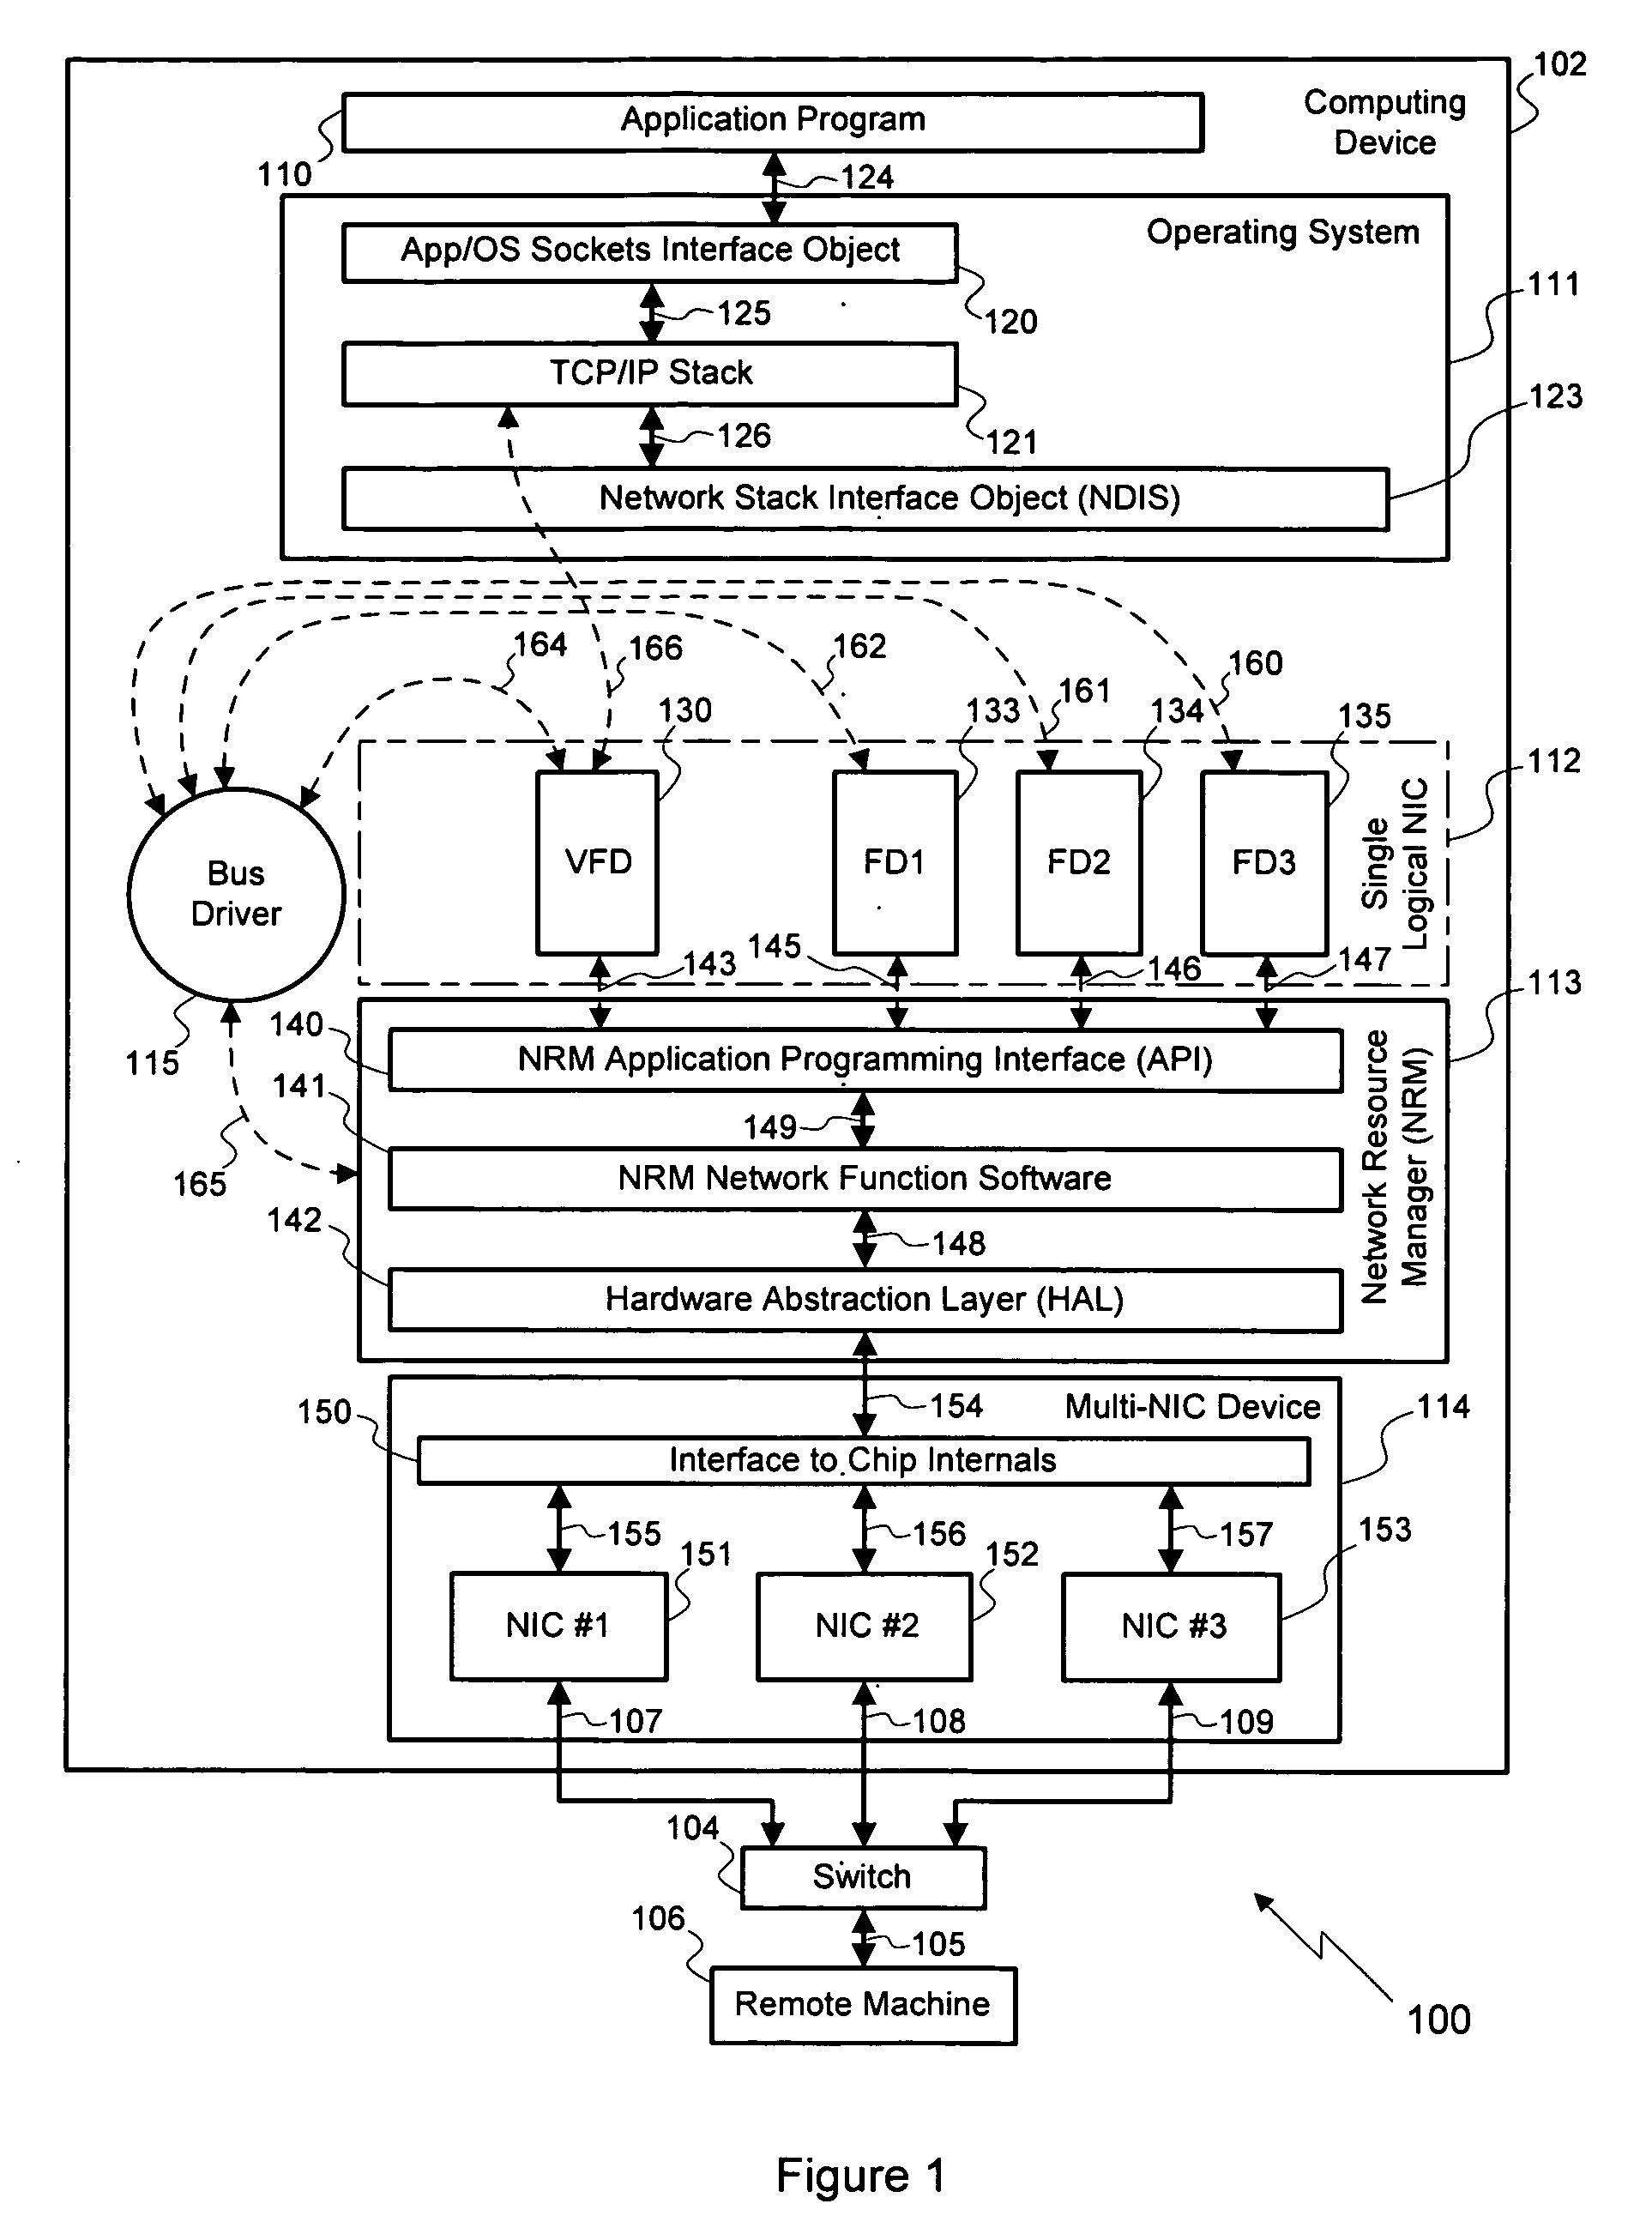 Single logical network interface for advanced load balancing and fail-over functionality